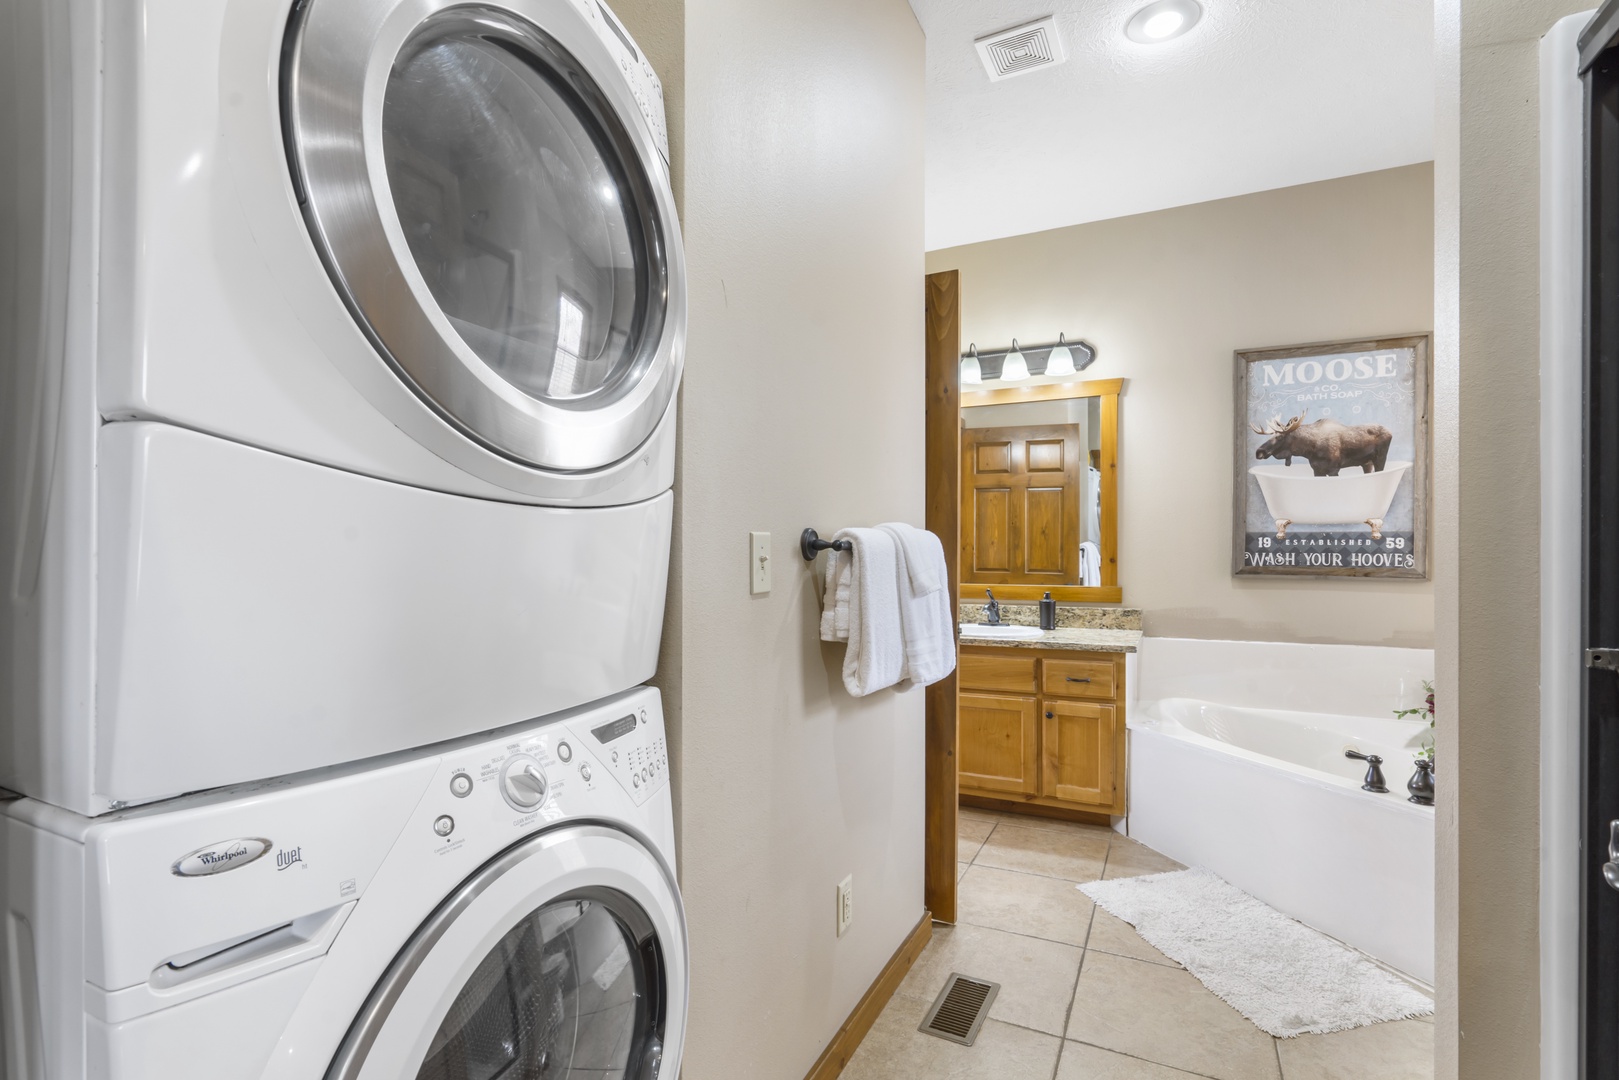 Private laundry is available for your stay, tucked away in the first ensuite